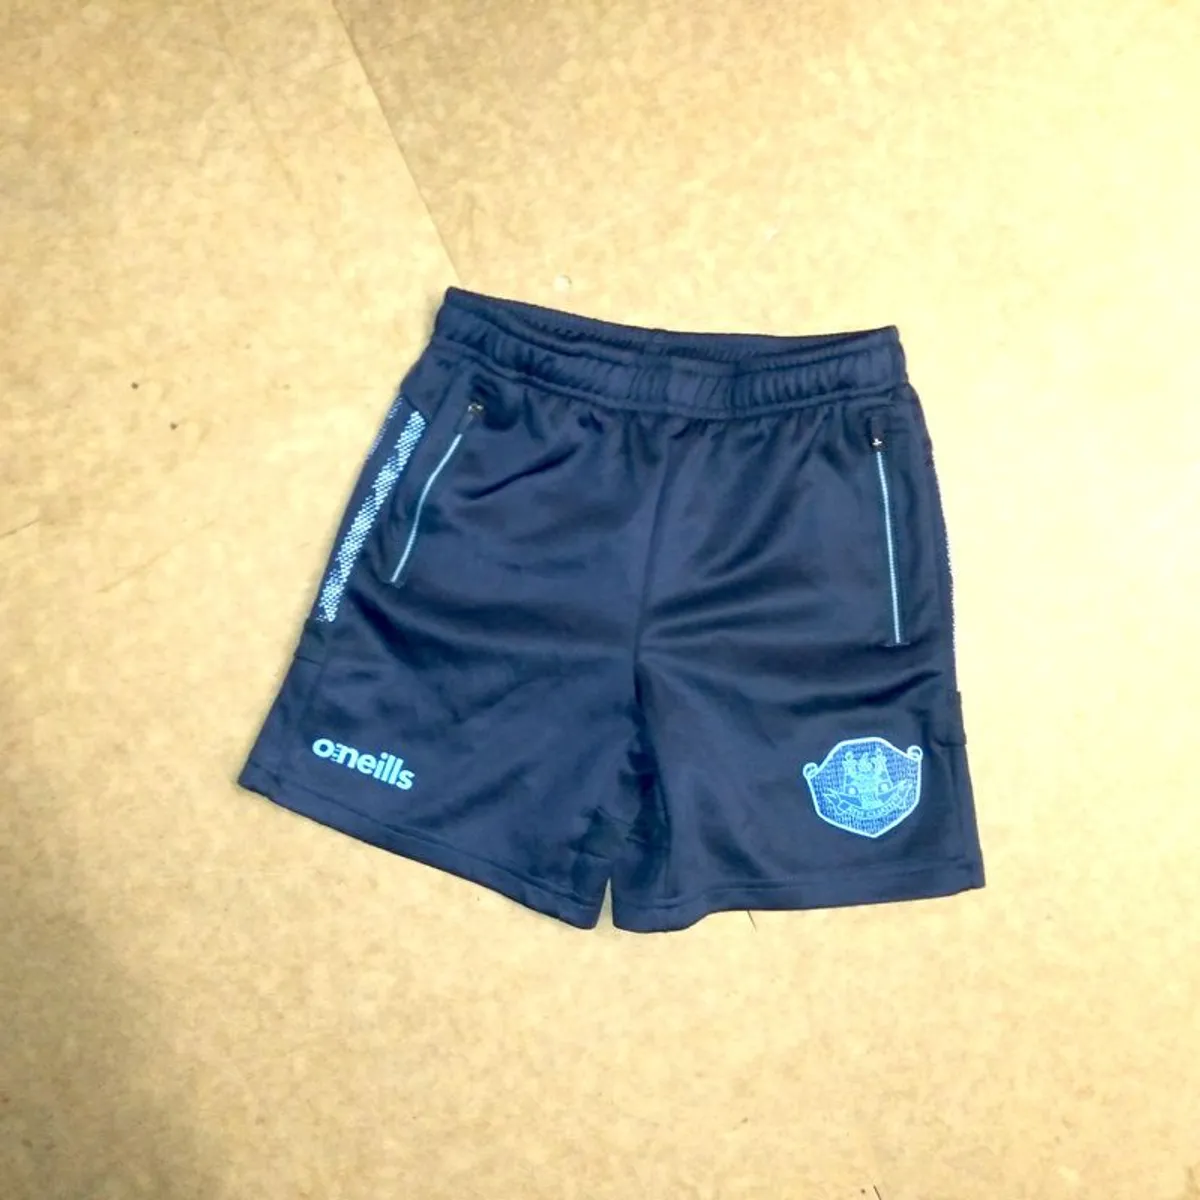 FREE POST Kids (9-10 Years) Dublin GAA  Shorts Gaelic Football Hurling Baile Atha Cliath Dubs Blue Bottoms Togs Pants Youths Childs Childrens Kids Boys Girls - Image 1